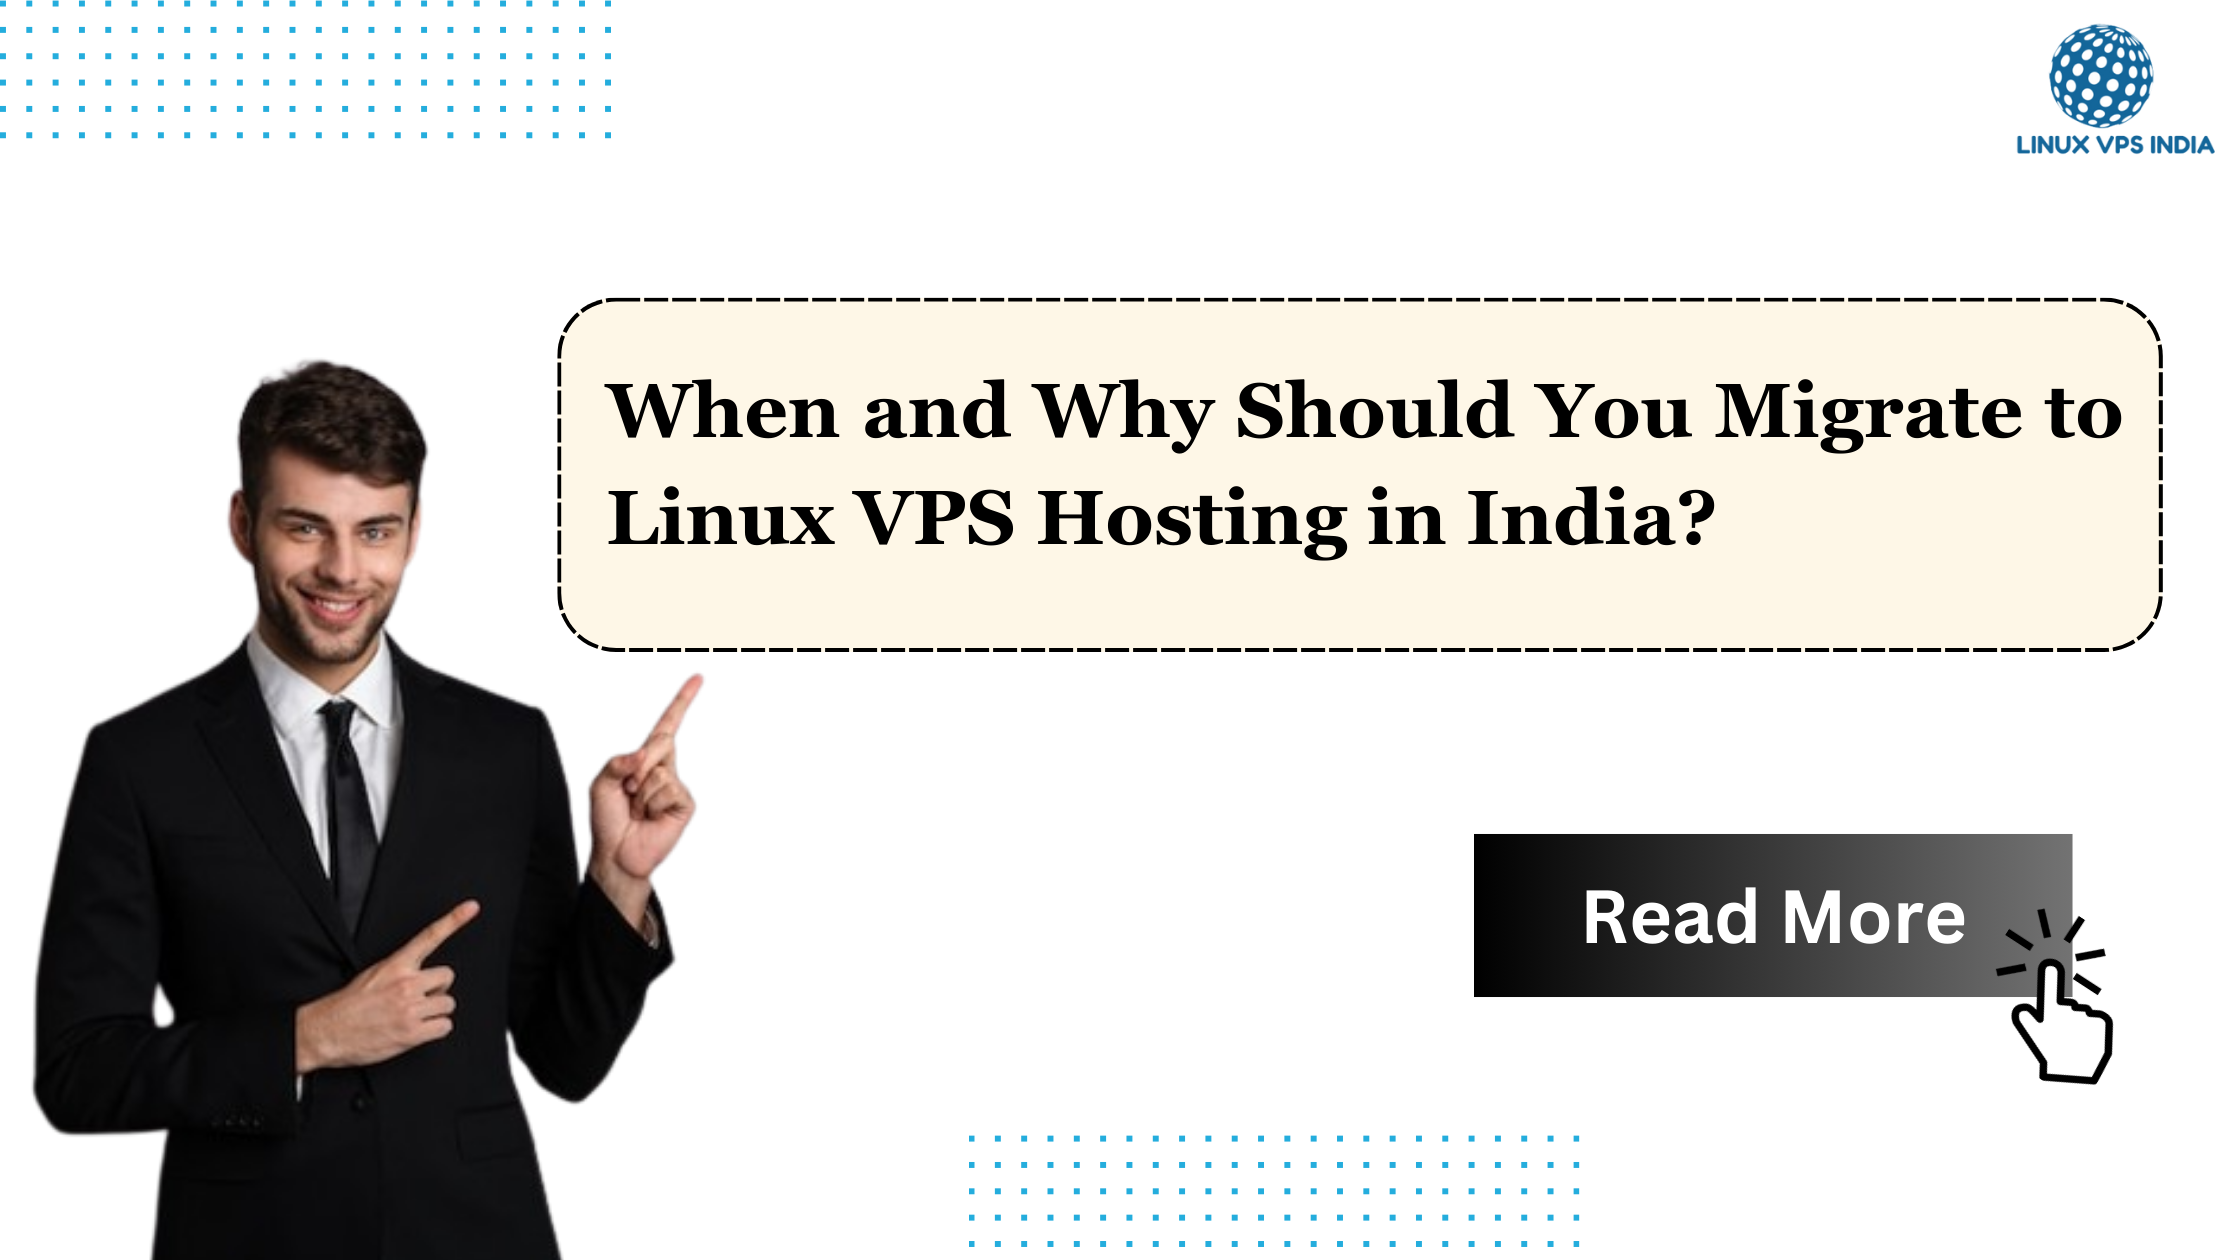 When and Why Should You Migrate to Linux VPS Hosting in India